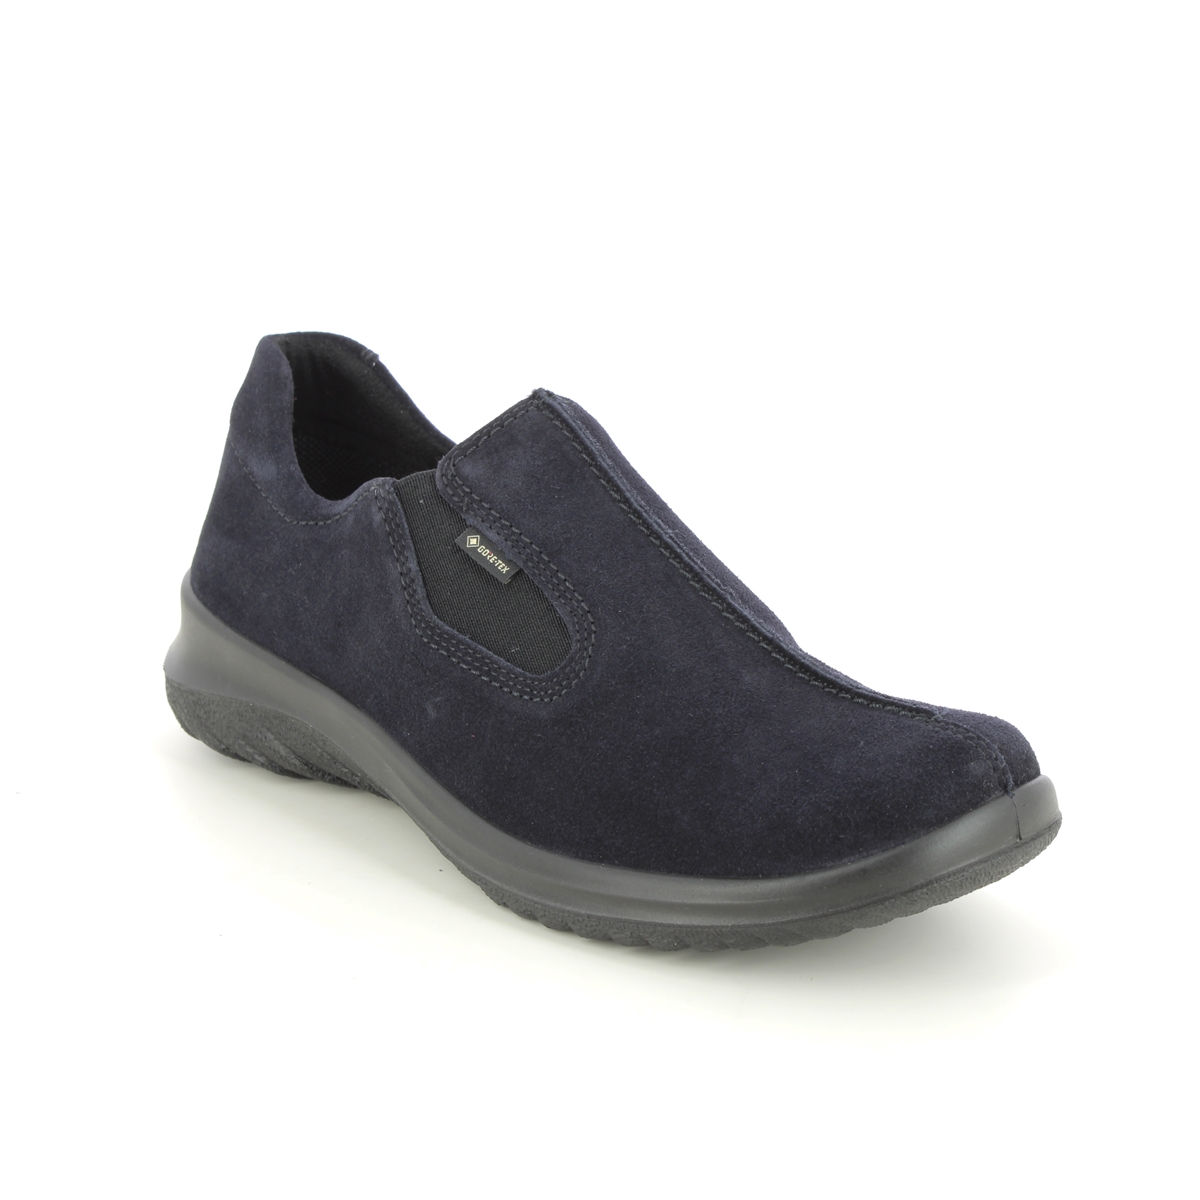 Legero Soft Shoe Gtx Navy Suede Womens Comfort Slip On Shoes 09568-80 In Size 4 In Plain Navy Suede